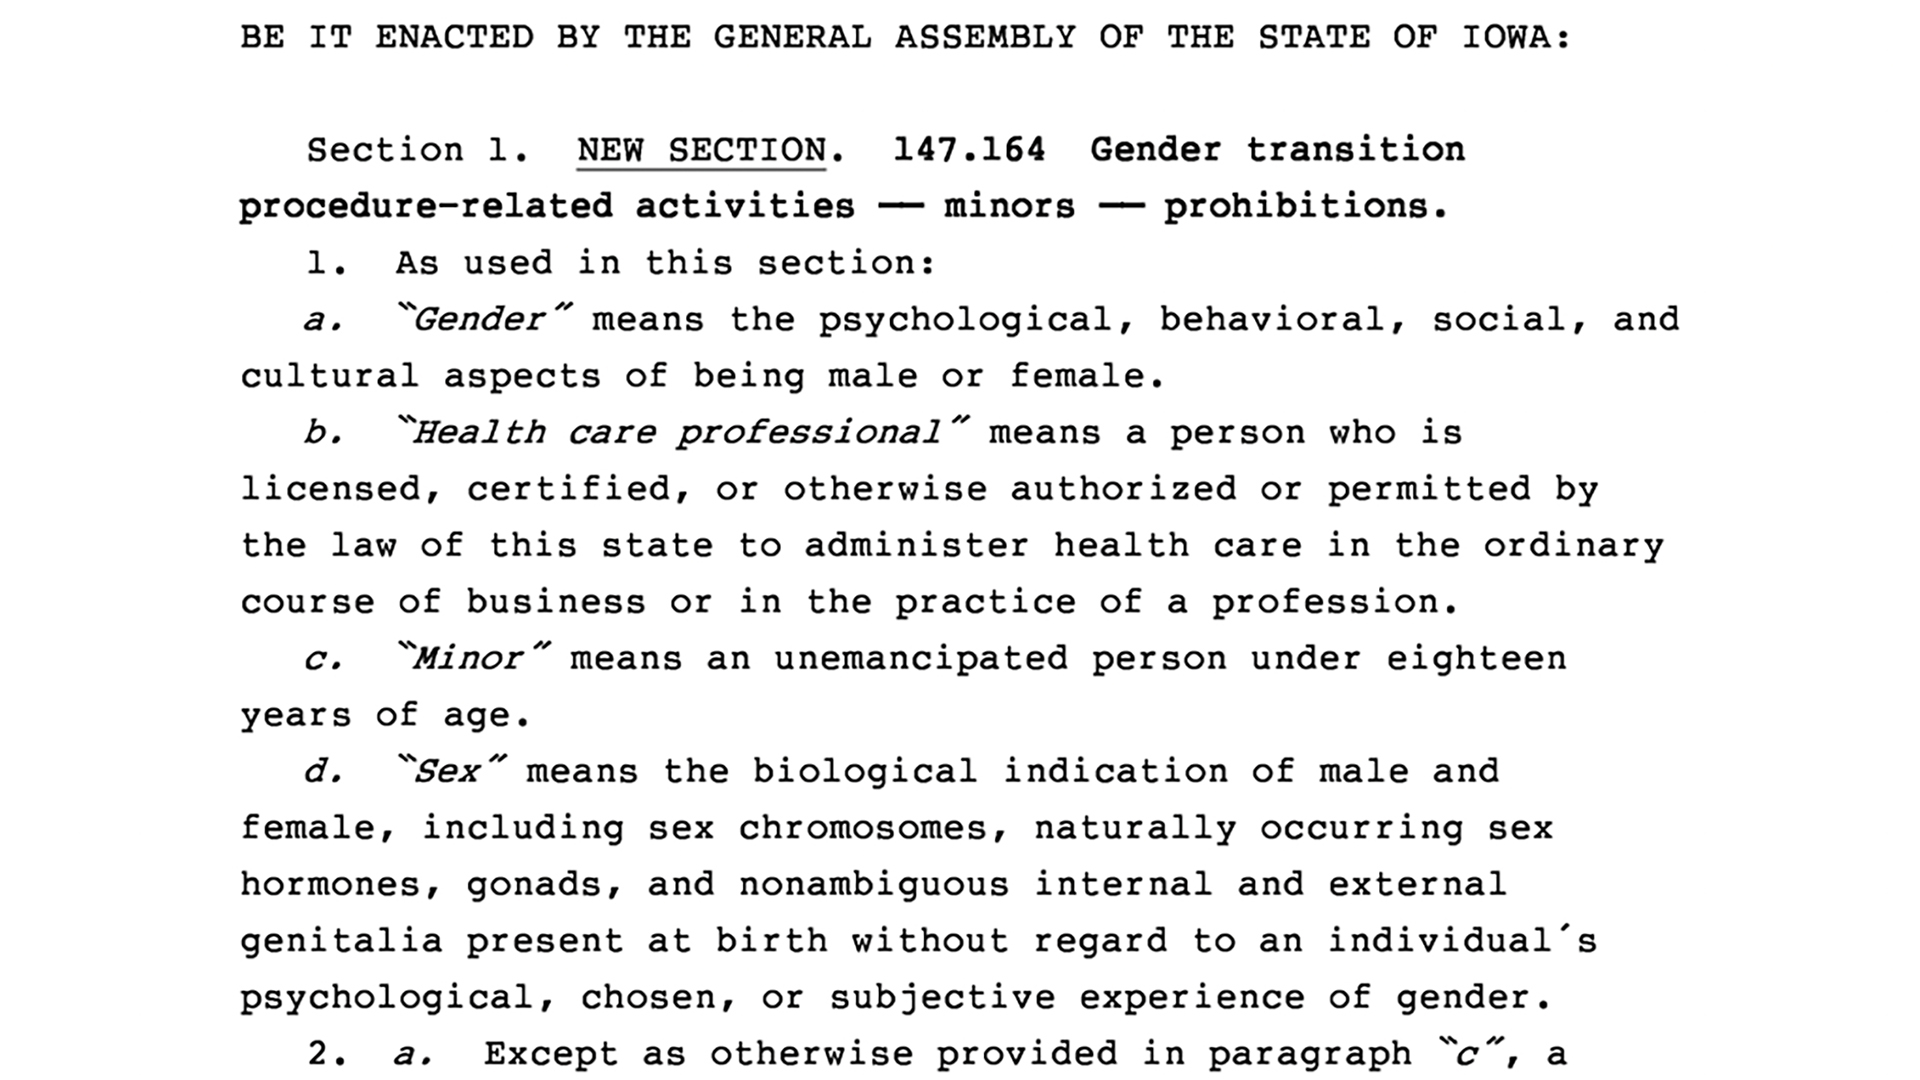 A screenshot of a portion of a bill begins with the text "BE IT ENACTED BY THE GENERAL ASSEMBLY OF THE STATE OF IOWA:" and follows with language that provide definitions of terms used in the legislation.